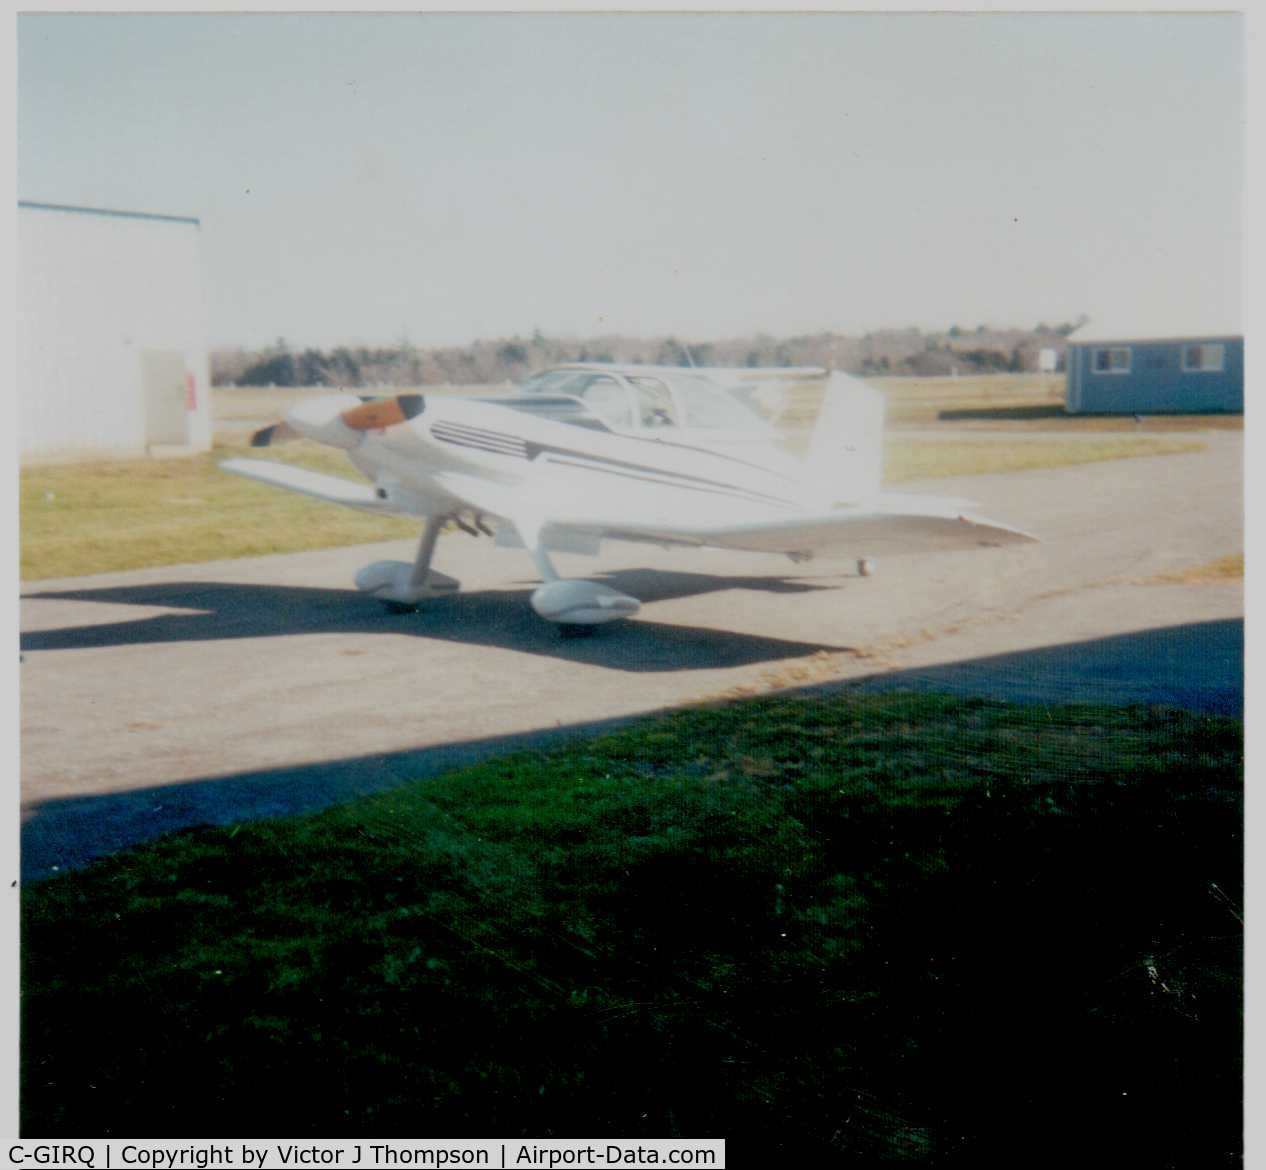 C-GIRQ, 1986 Thorp T-18 Tiger C/N 423, All ready to go